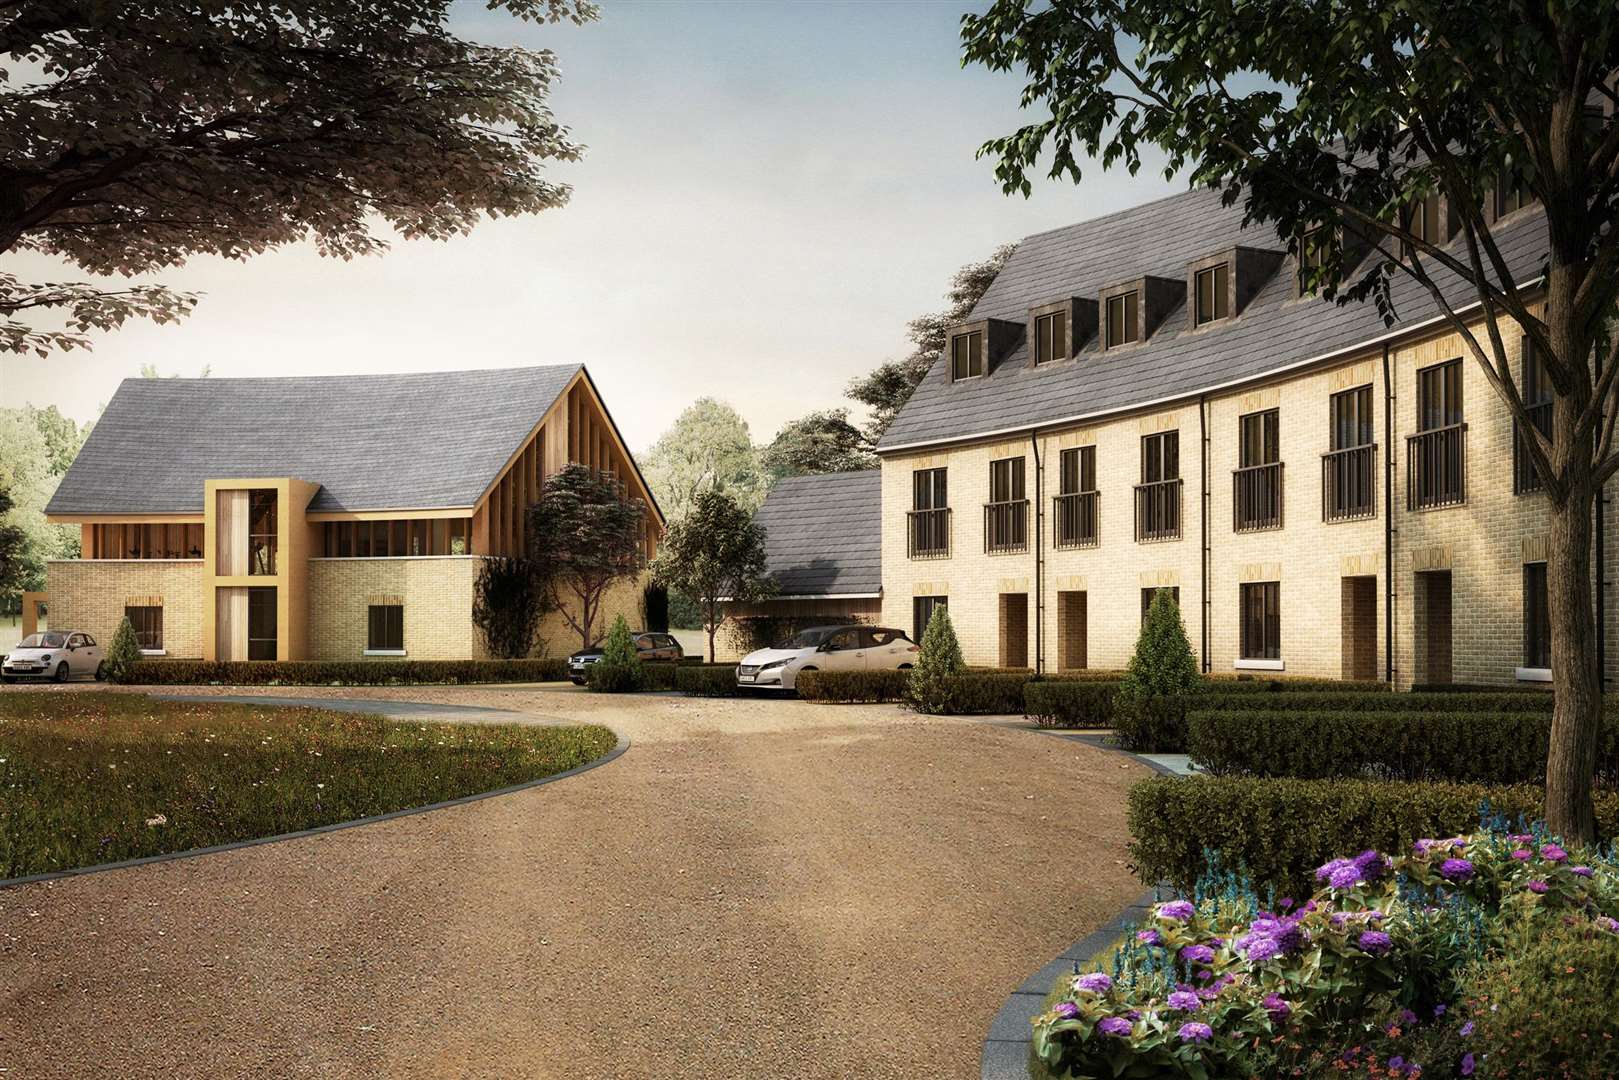 A crescent view of the plans for the Centenary Village in CGI. Credit: Clague Architects